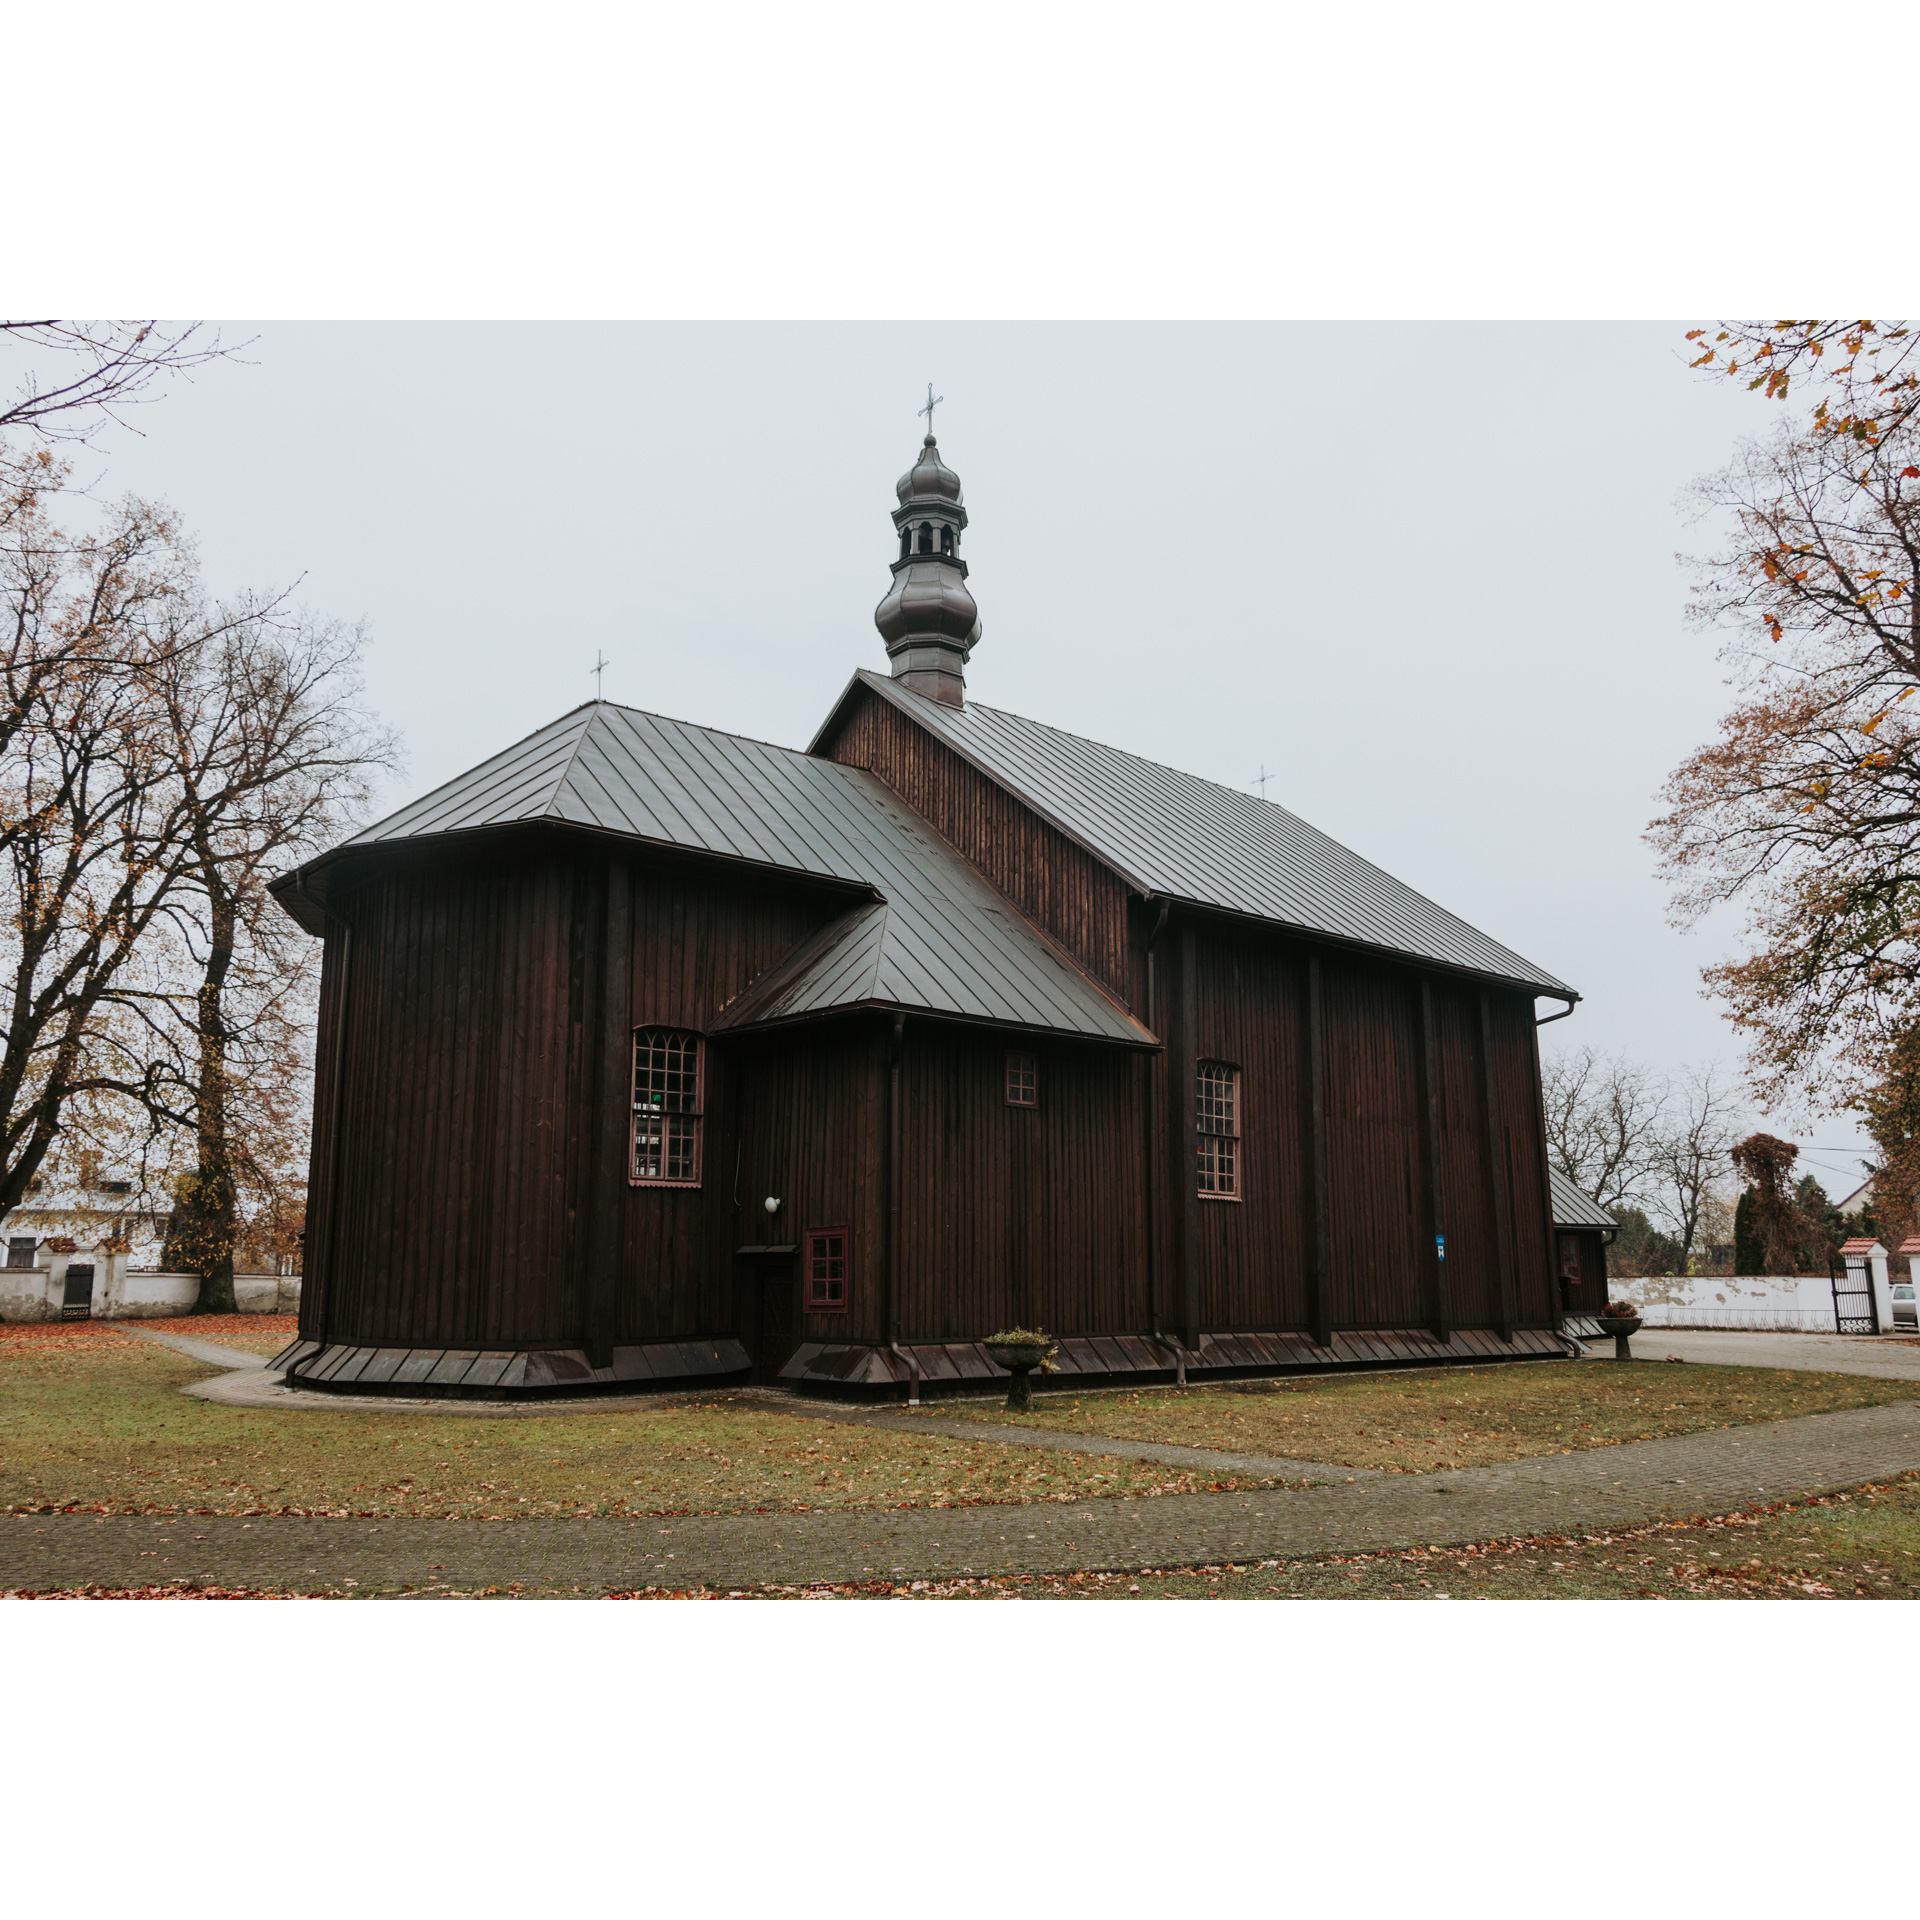 A wooden, small church with a sloping gray roof